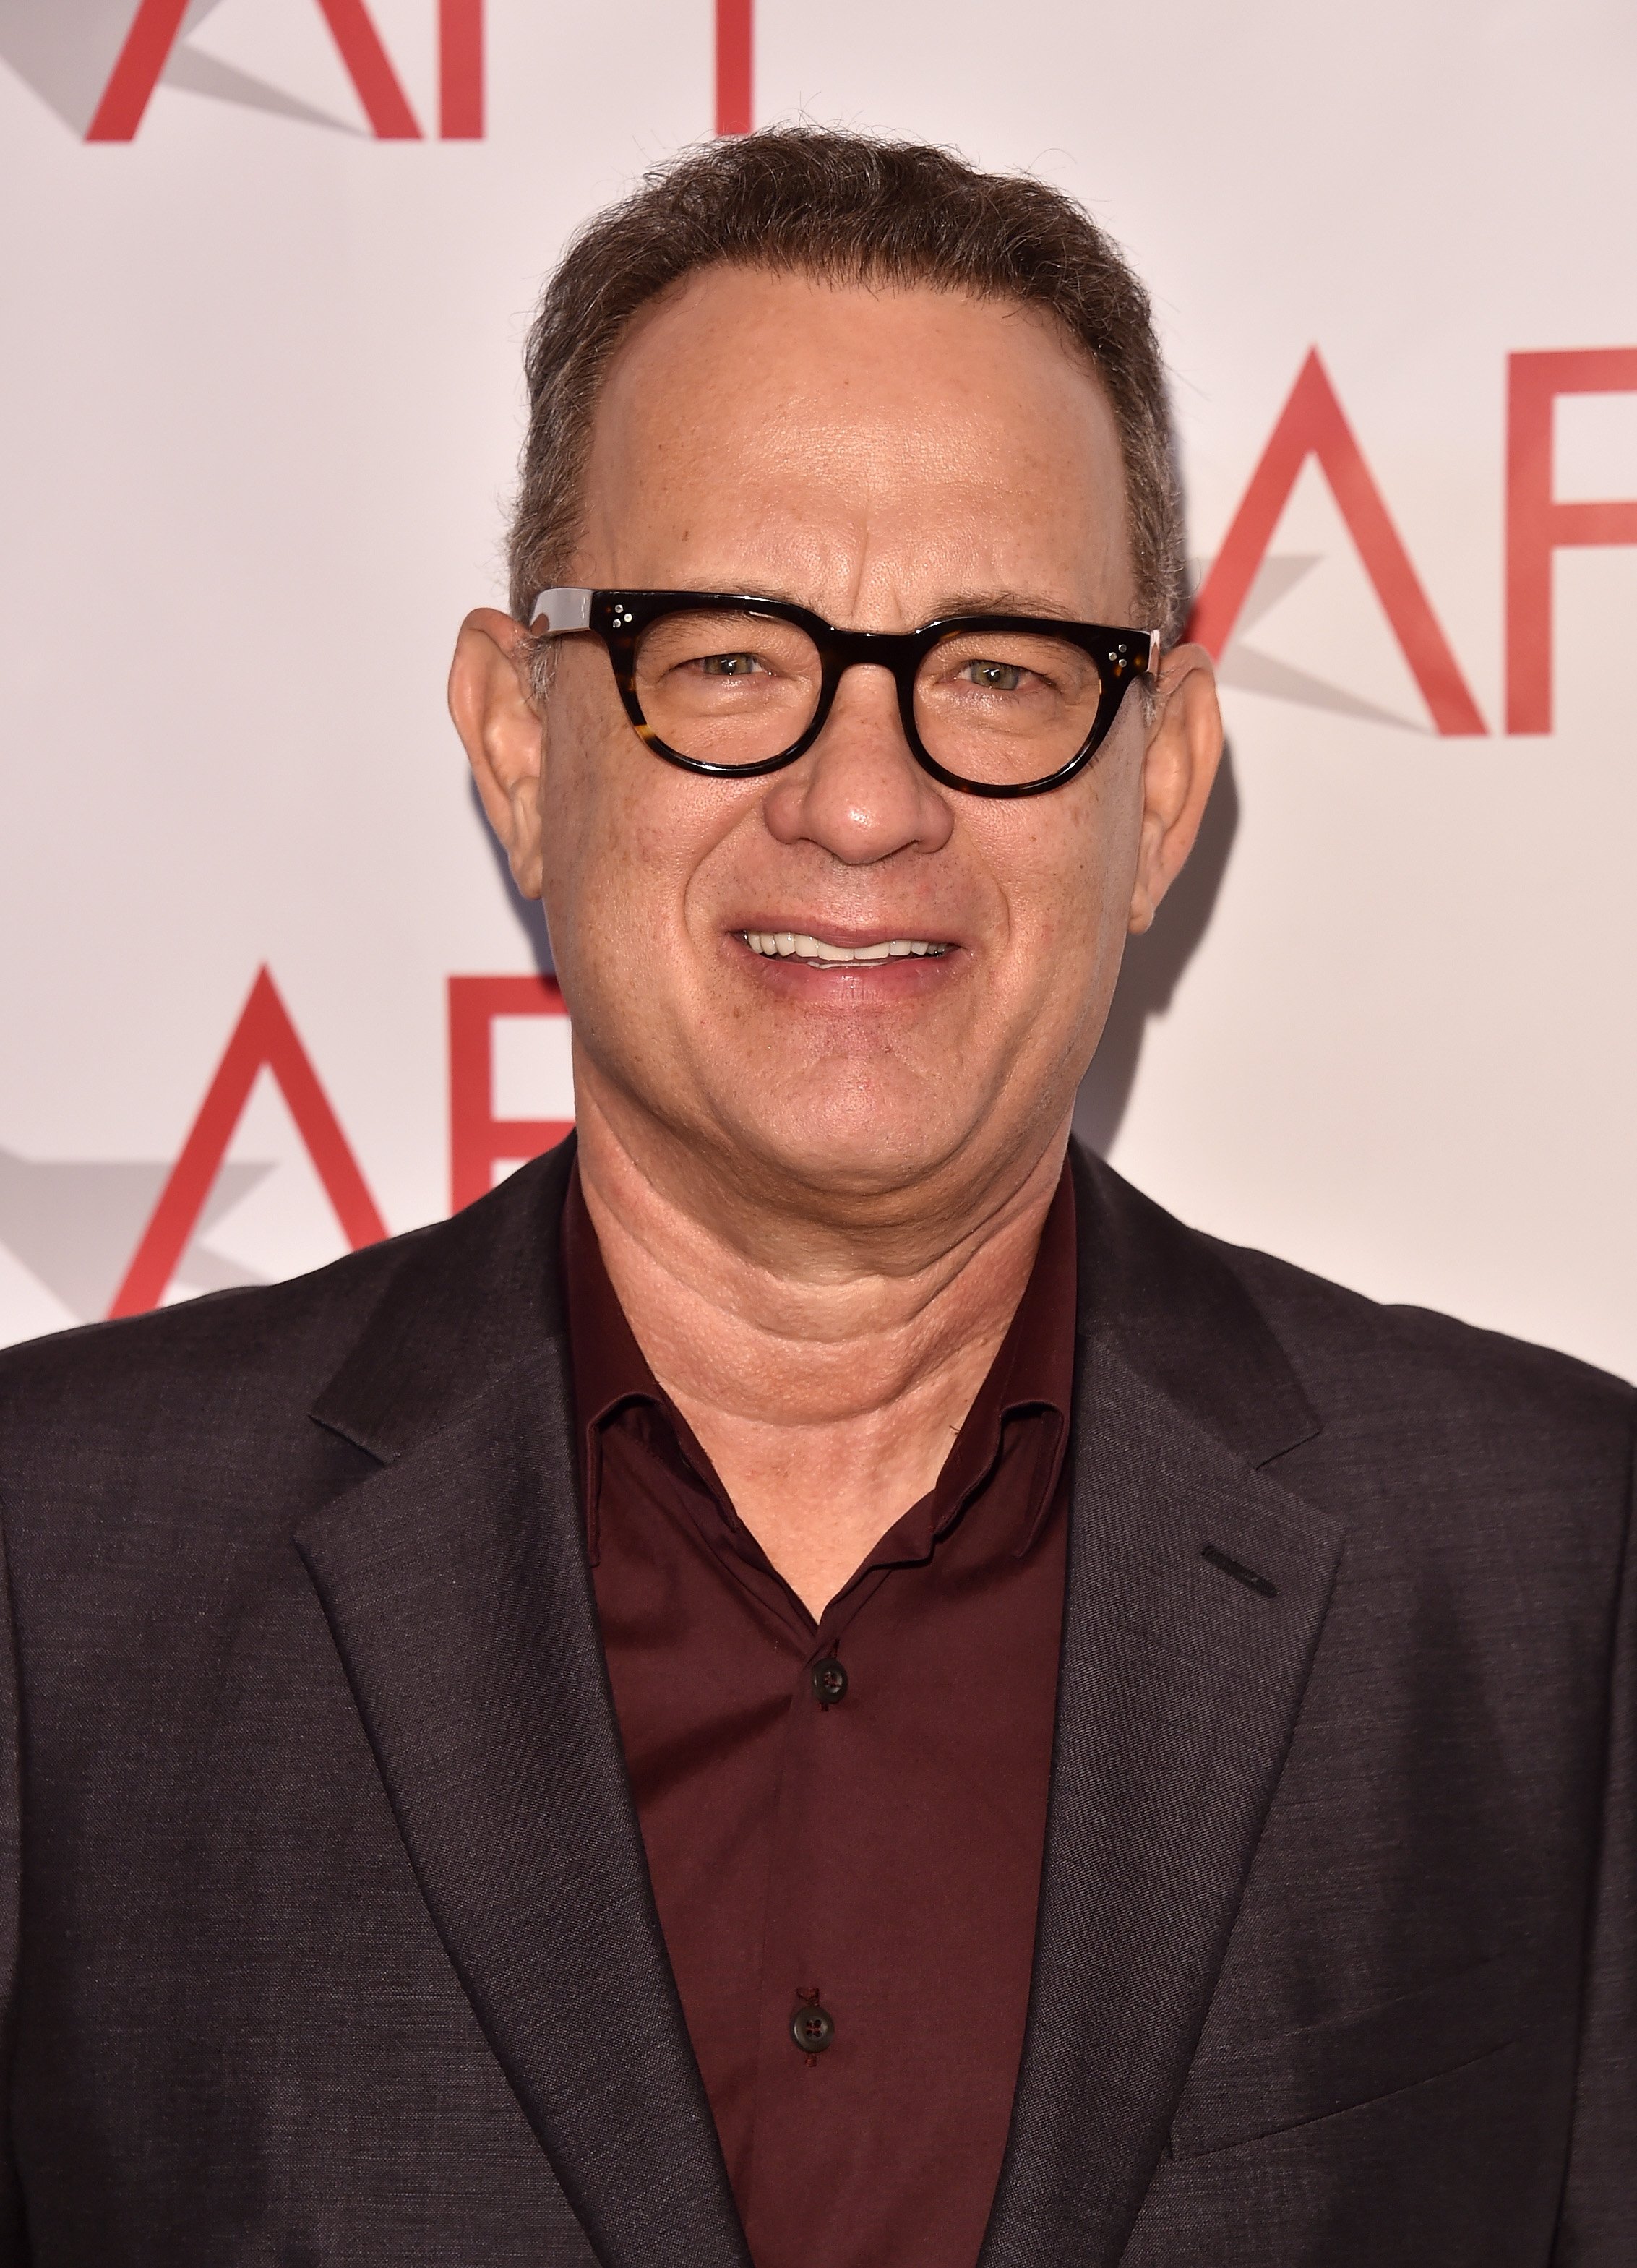 Tom Hanks at the 18th Annual AFI Awards on January 5, 2018, in Beverly Hills, Los Angeles, California. | Source: Getty Images